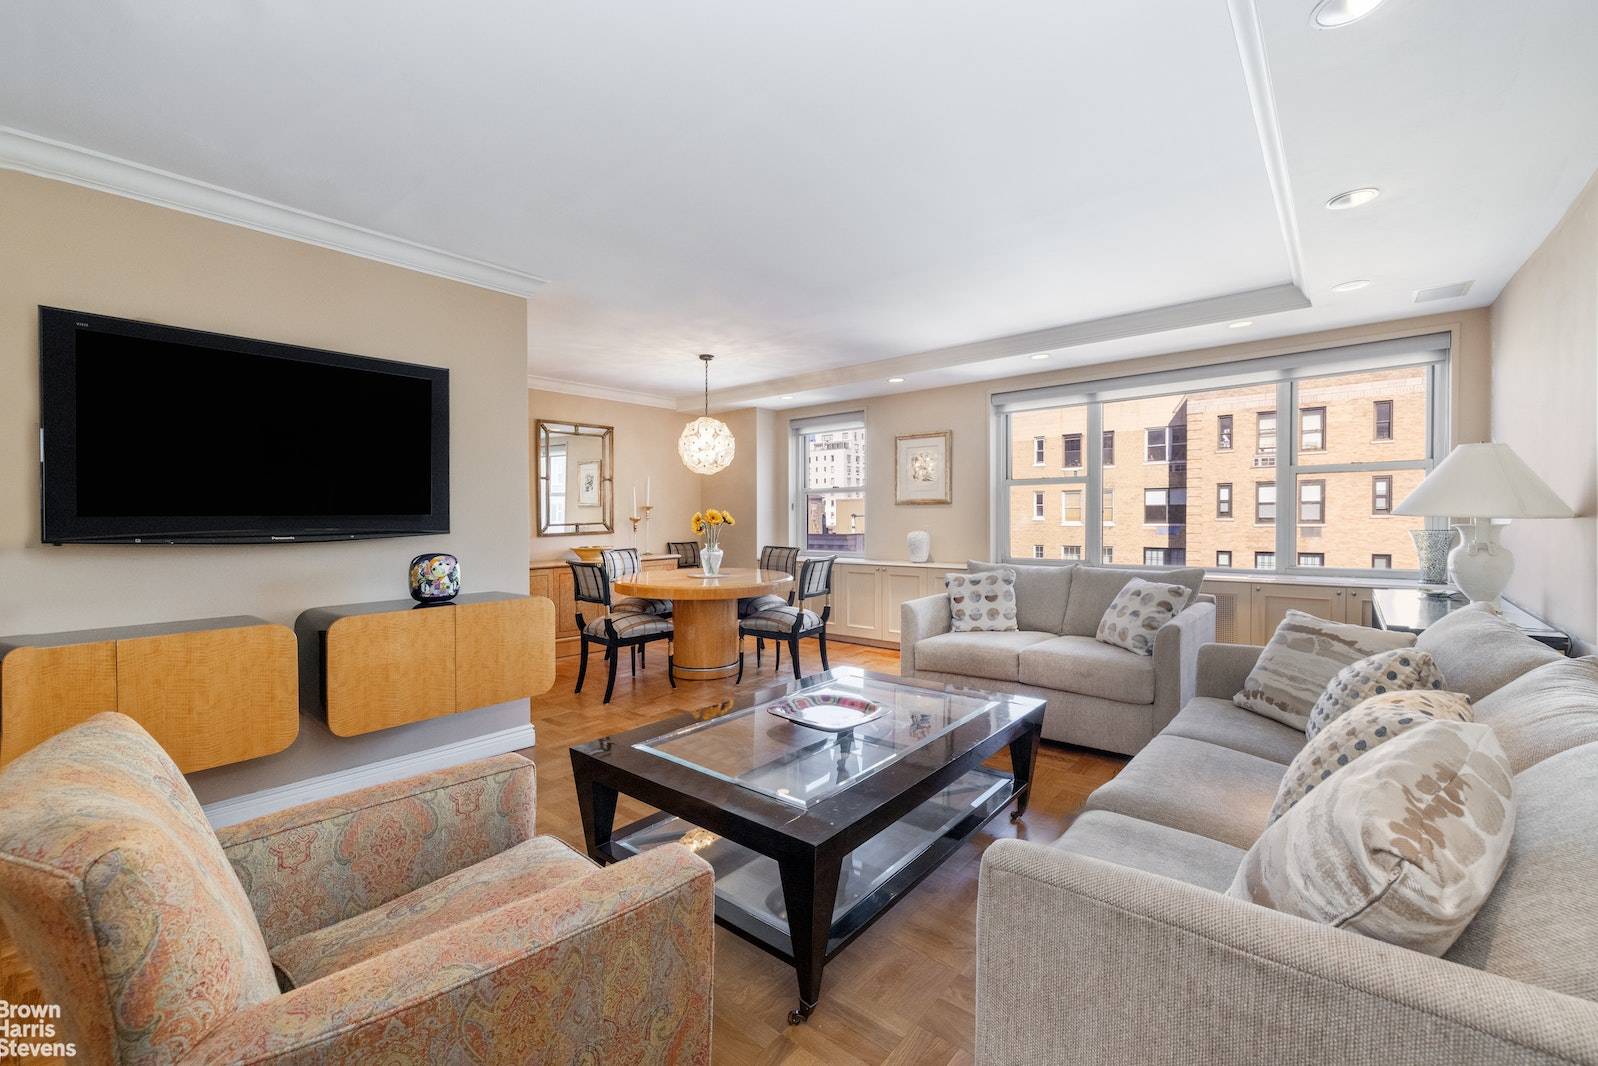 This exceptional apartment has everything needed to thoroughly enjoy life in NYC !